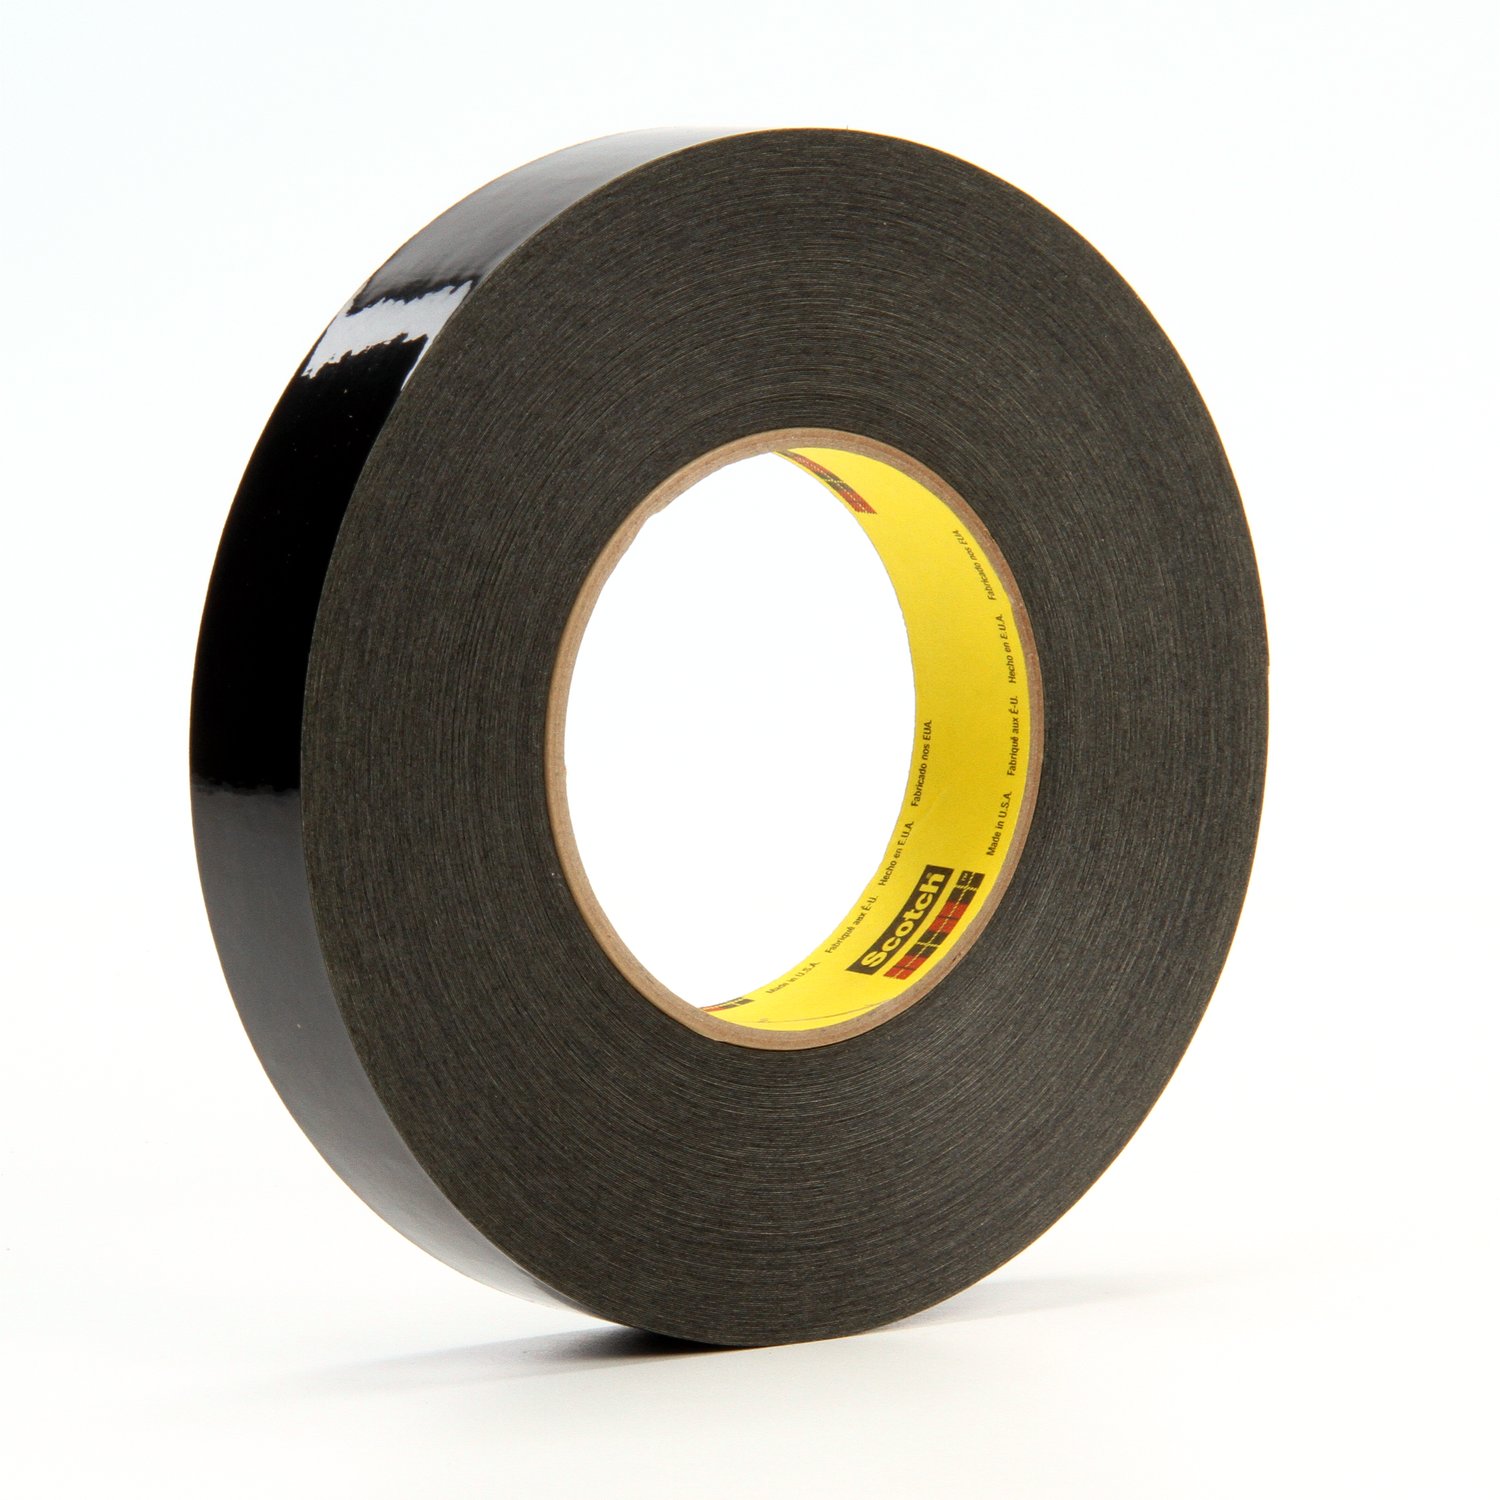 7010334220 - Scotch Solvent Resistant Masking Tape 226, Black, 1 in x 60 yd, 10.6
mil, 36/Case